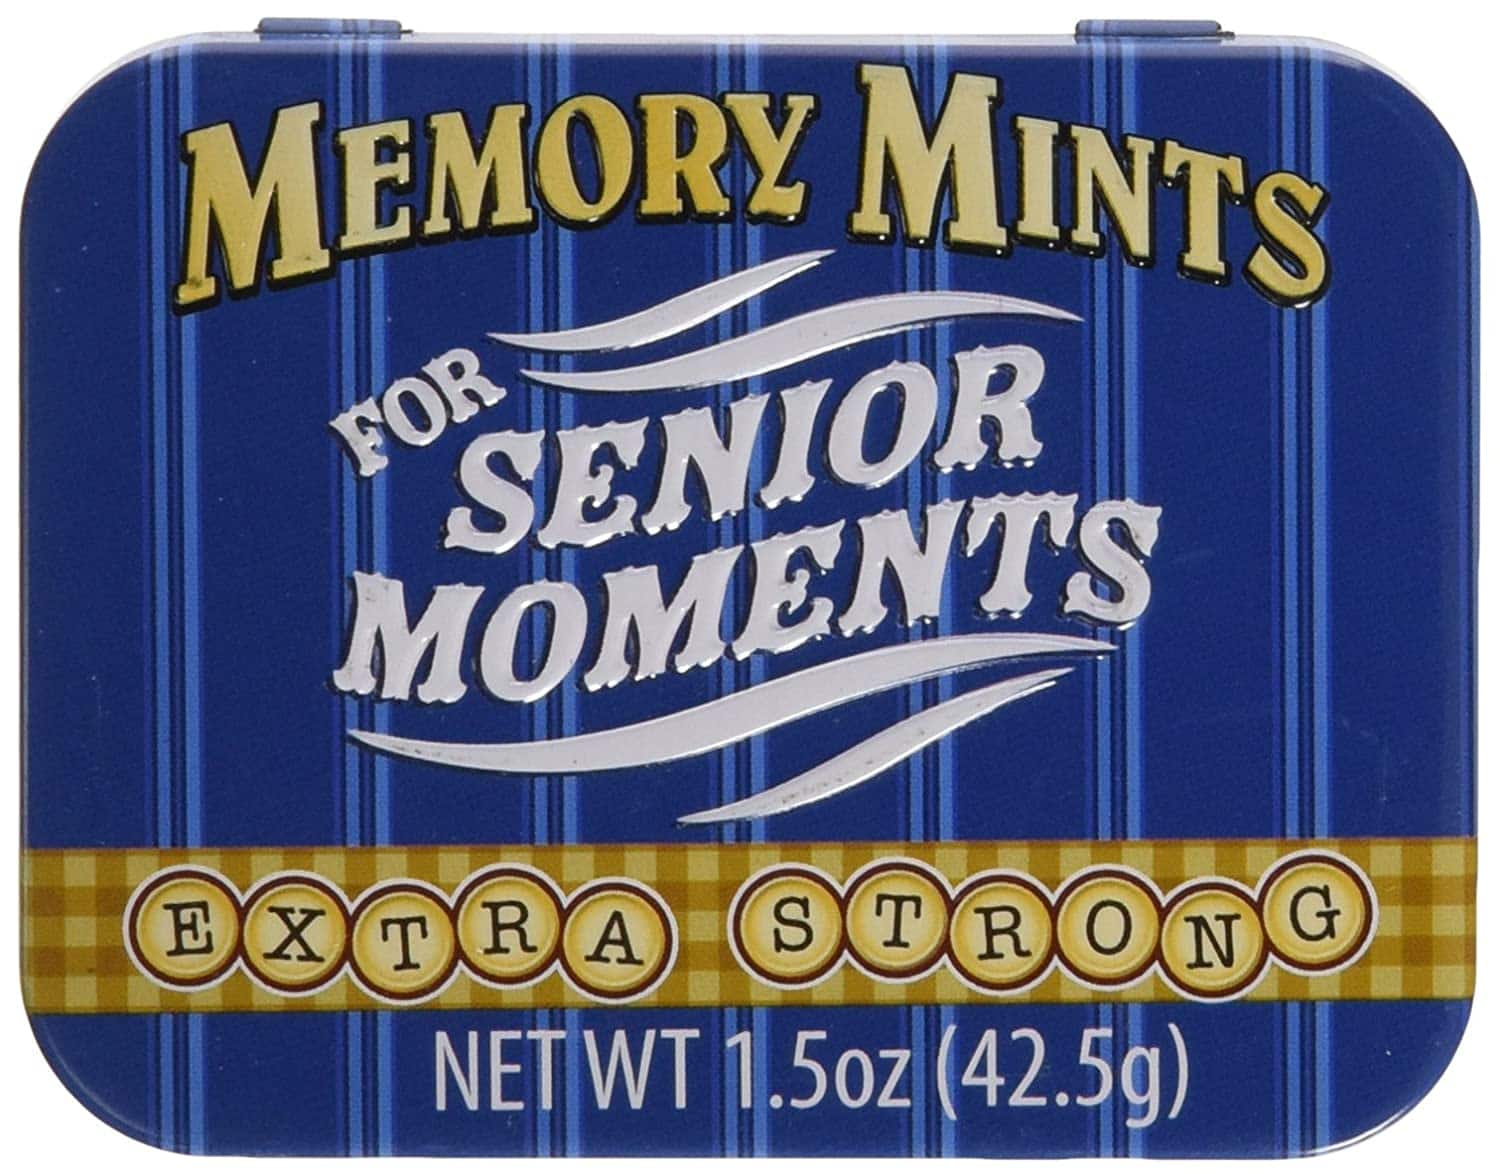 Blue mint tin that says memory mints for senior moments extra strong. 